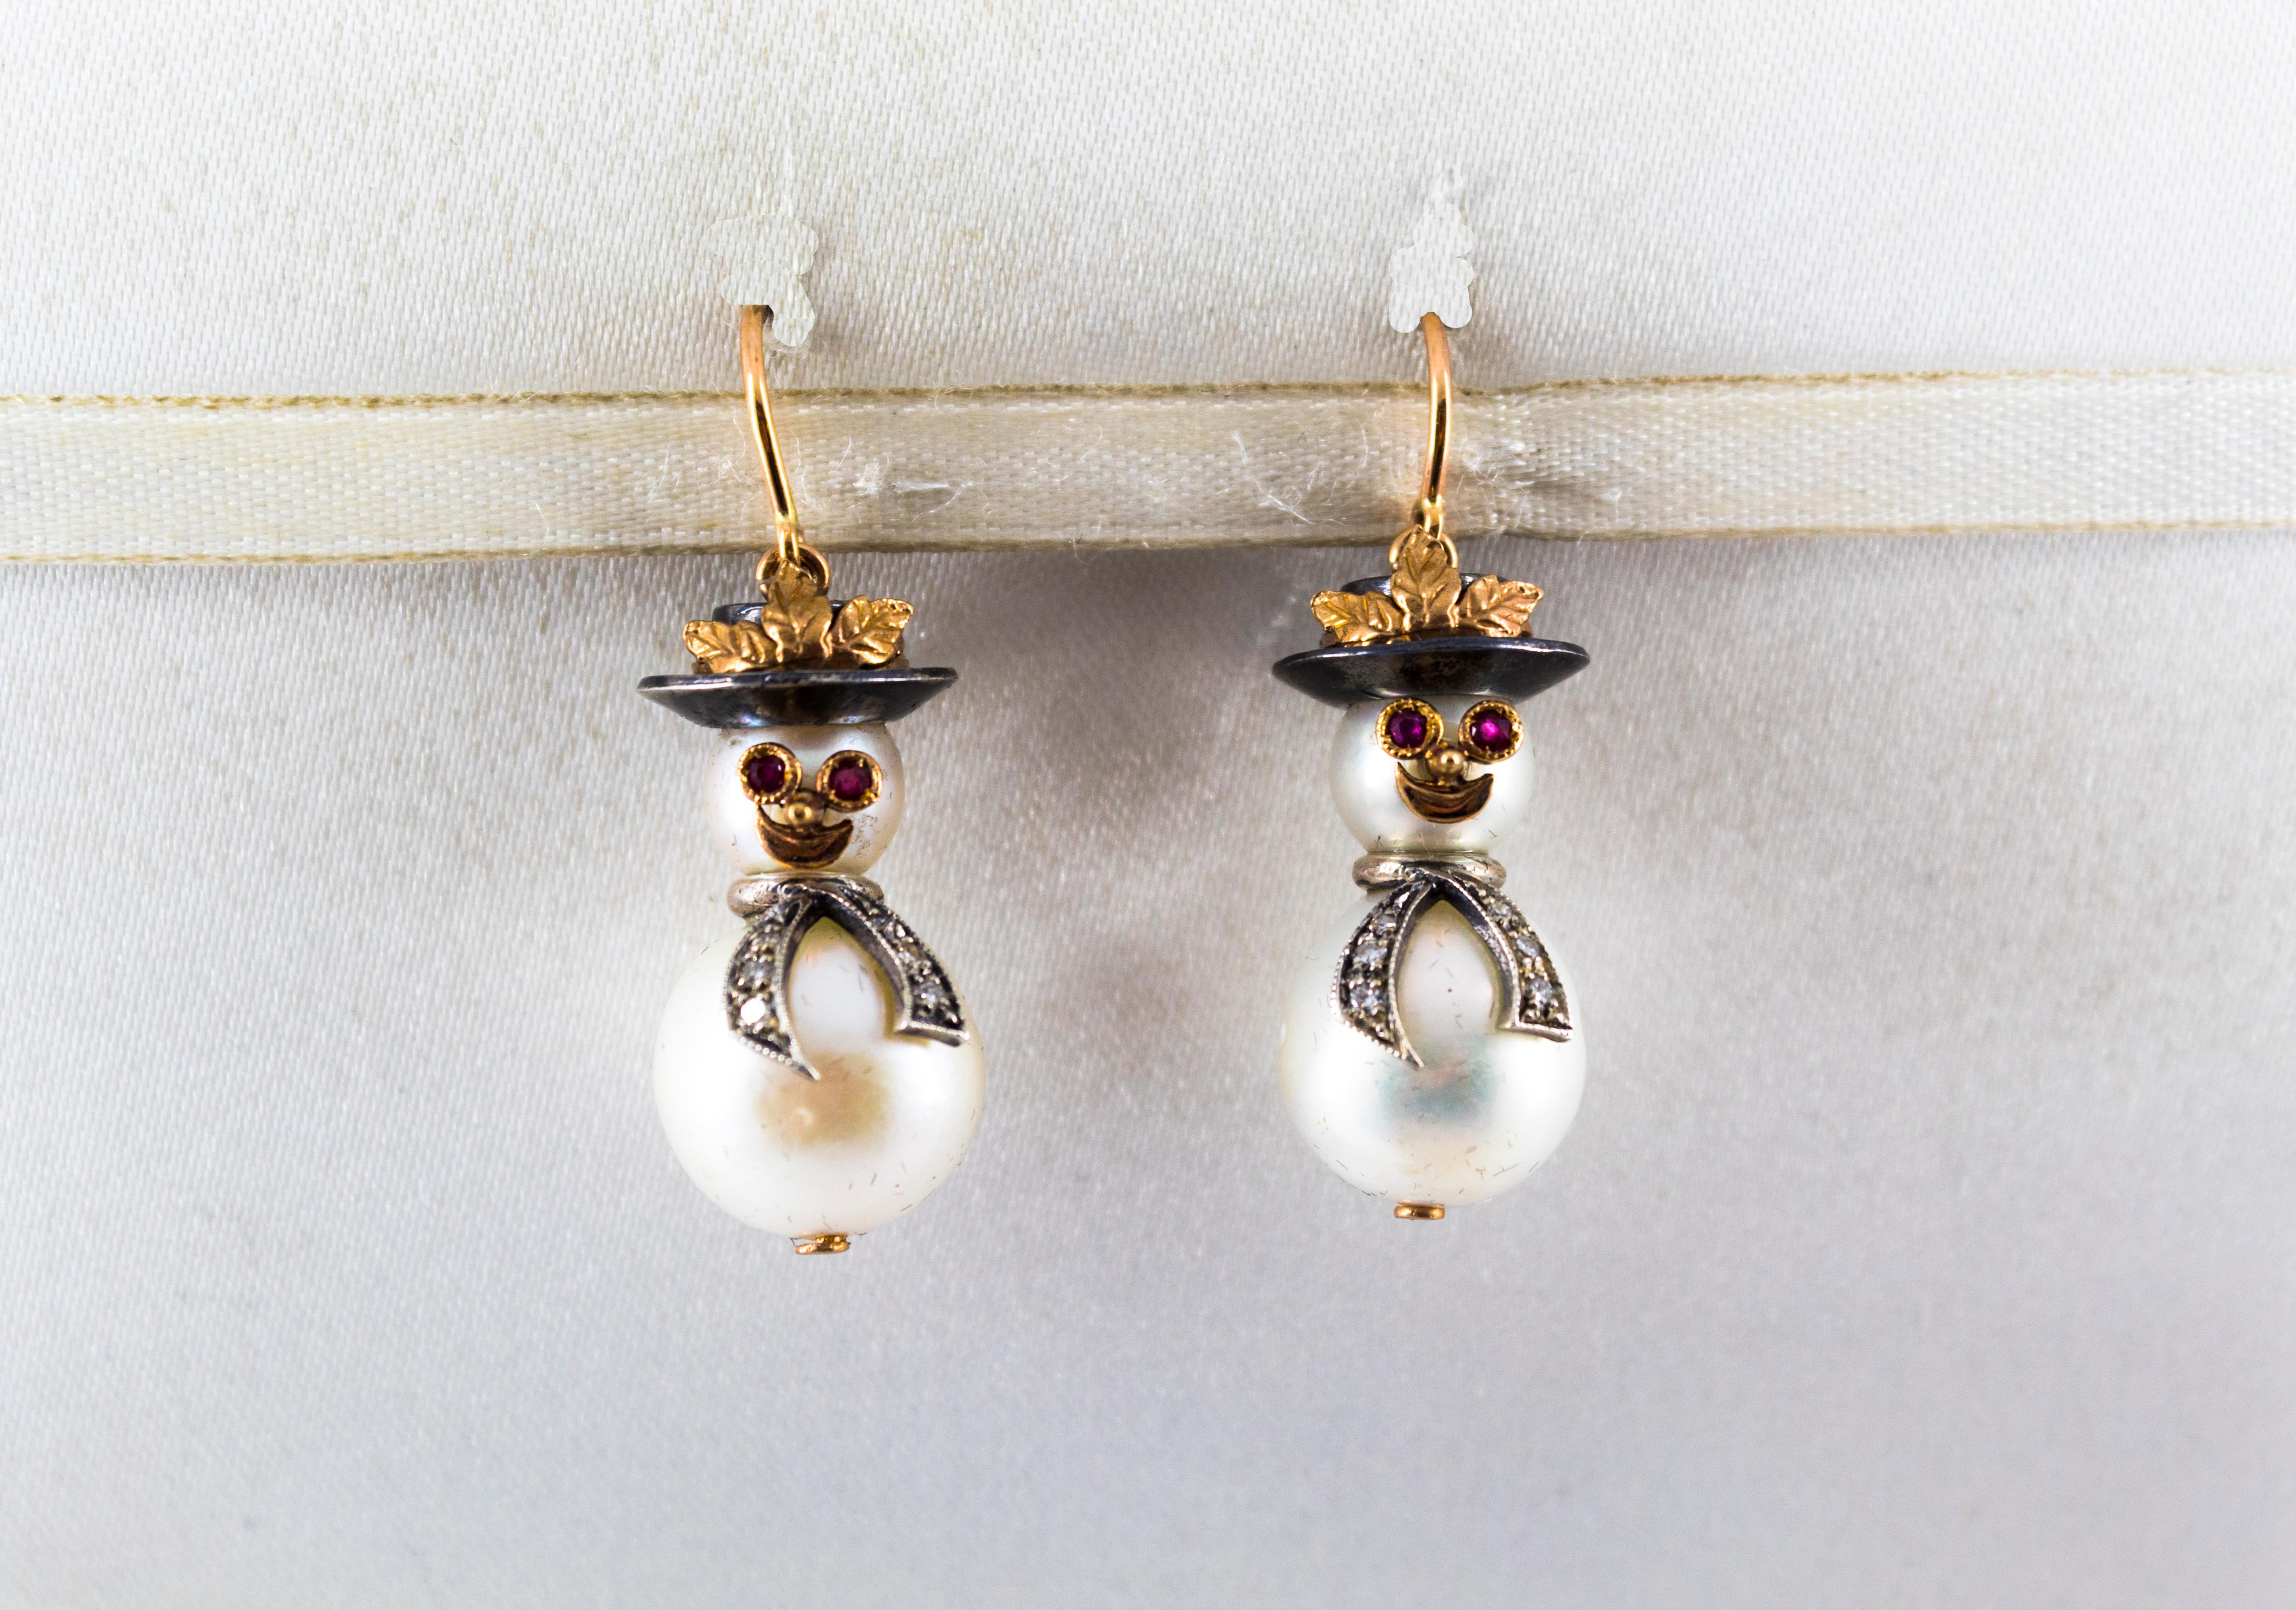 These Earrings are made of 9K Yellow Gold and Sterling Silver.
These Earrings have 0.15 Carats of White Diamonds.
These Earrings have 0.10 Carats of Rubies.
These Earrings have also two Indonesian Pearls and two Japanese Pearls.
All our Earrings